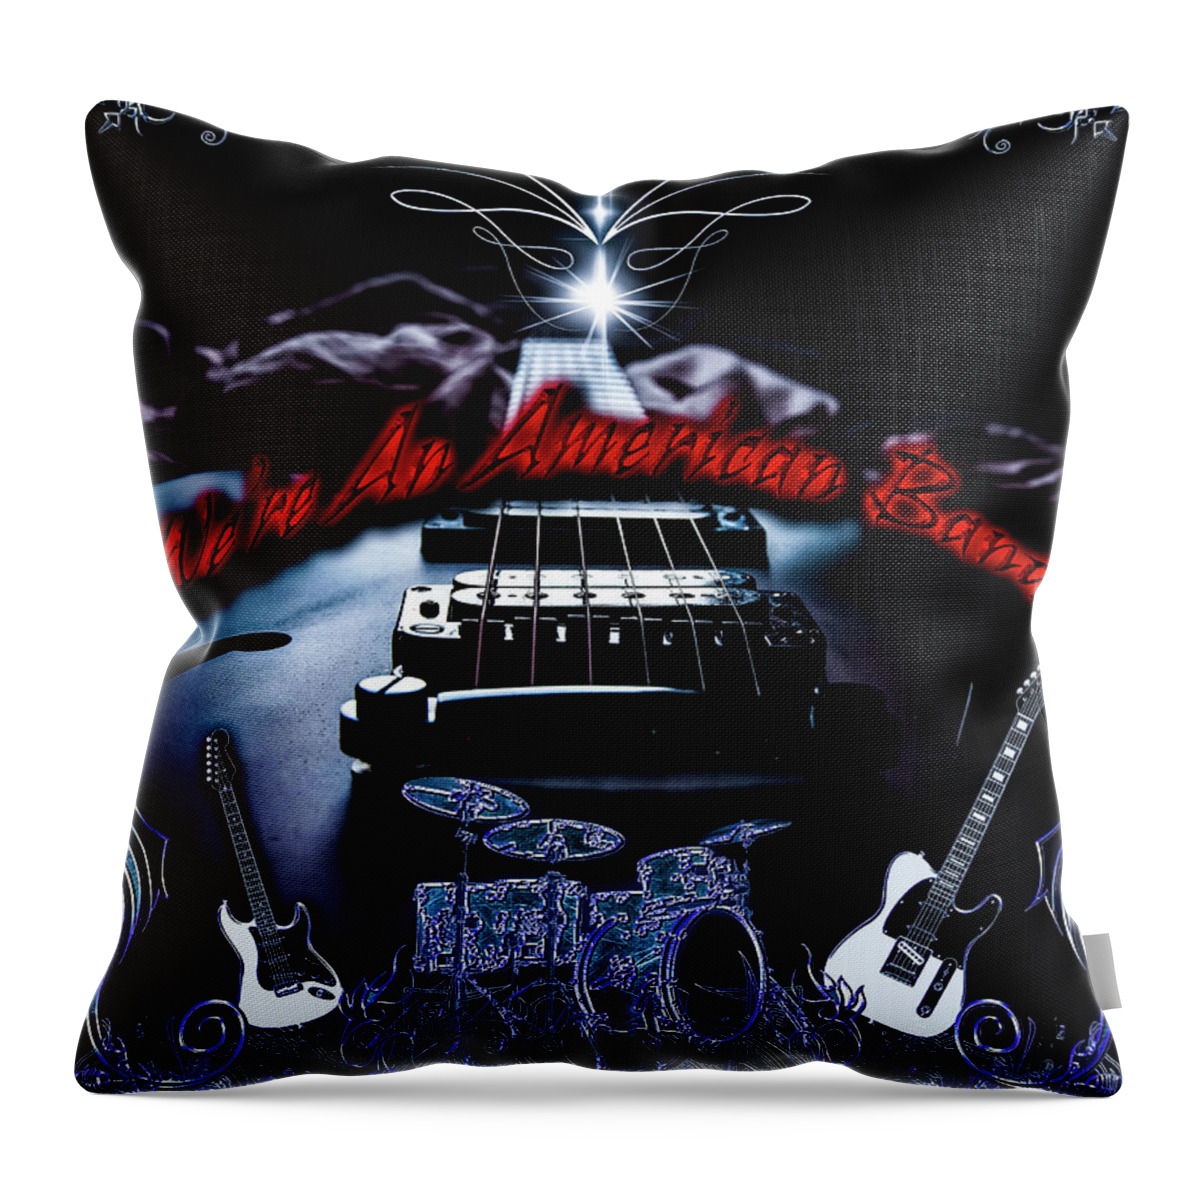 Grand Funk Railroad Throw Pillow featuring the digital art We're An American Band by Michael Damiani